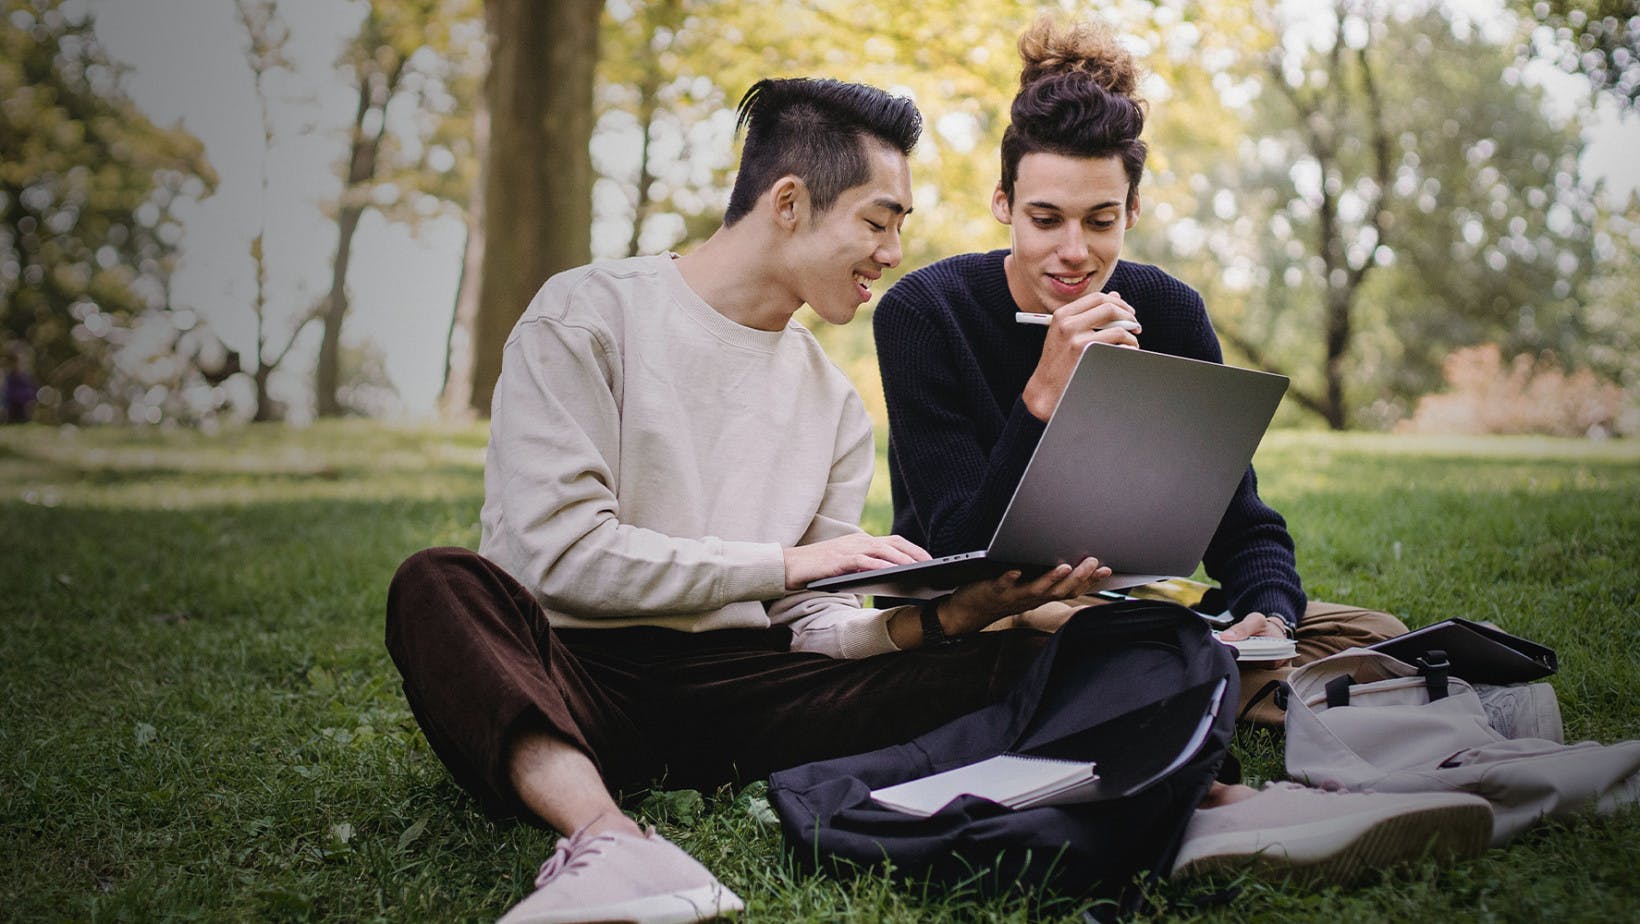 Two college students sitting on a lawn looking at a laptop